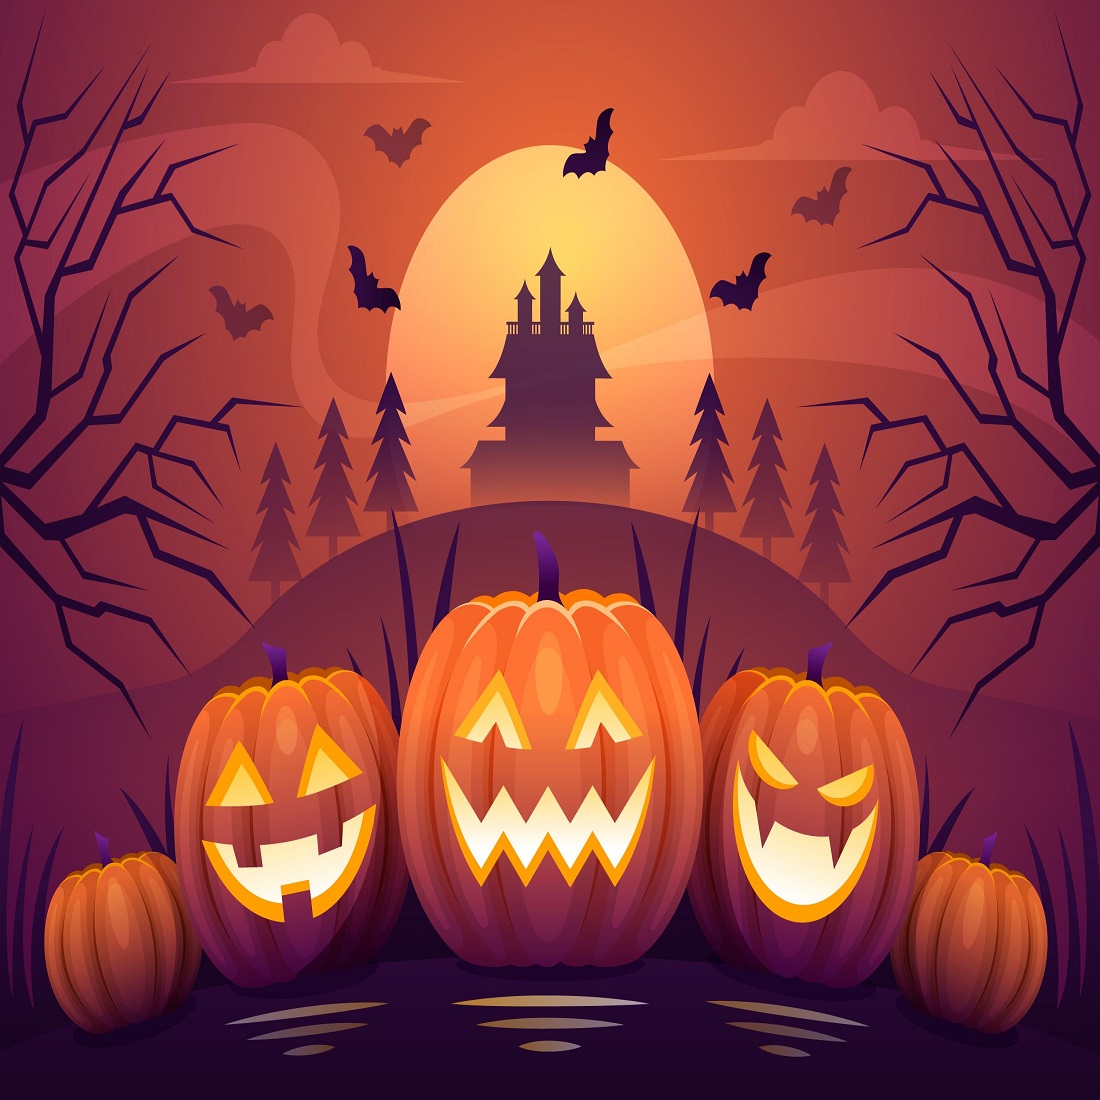 Halloween background flat design cover image.